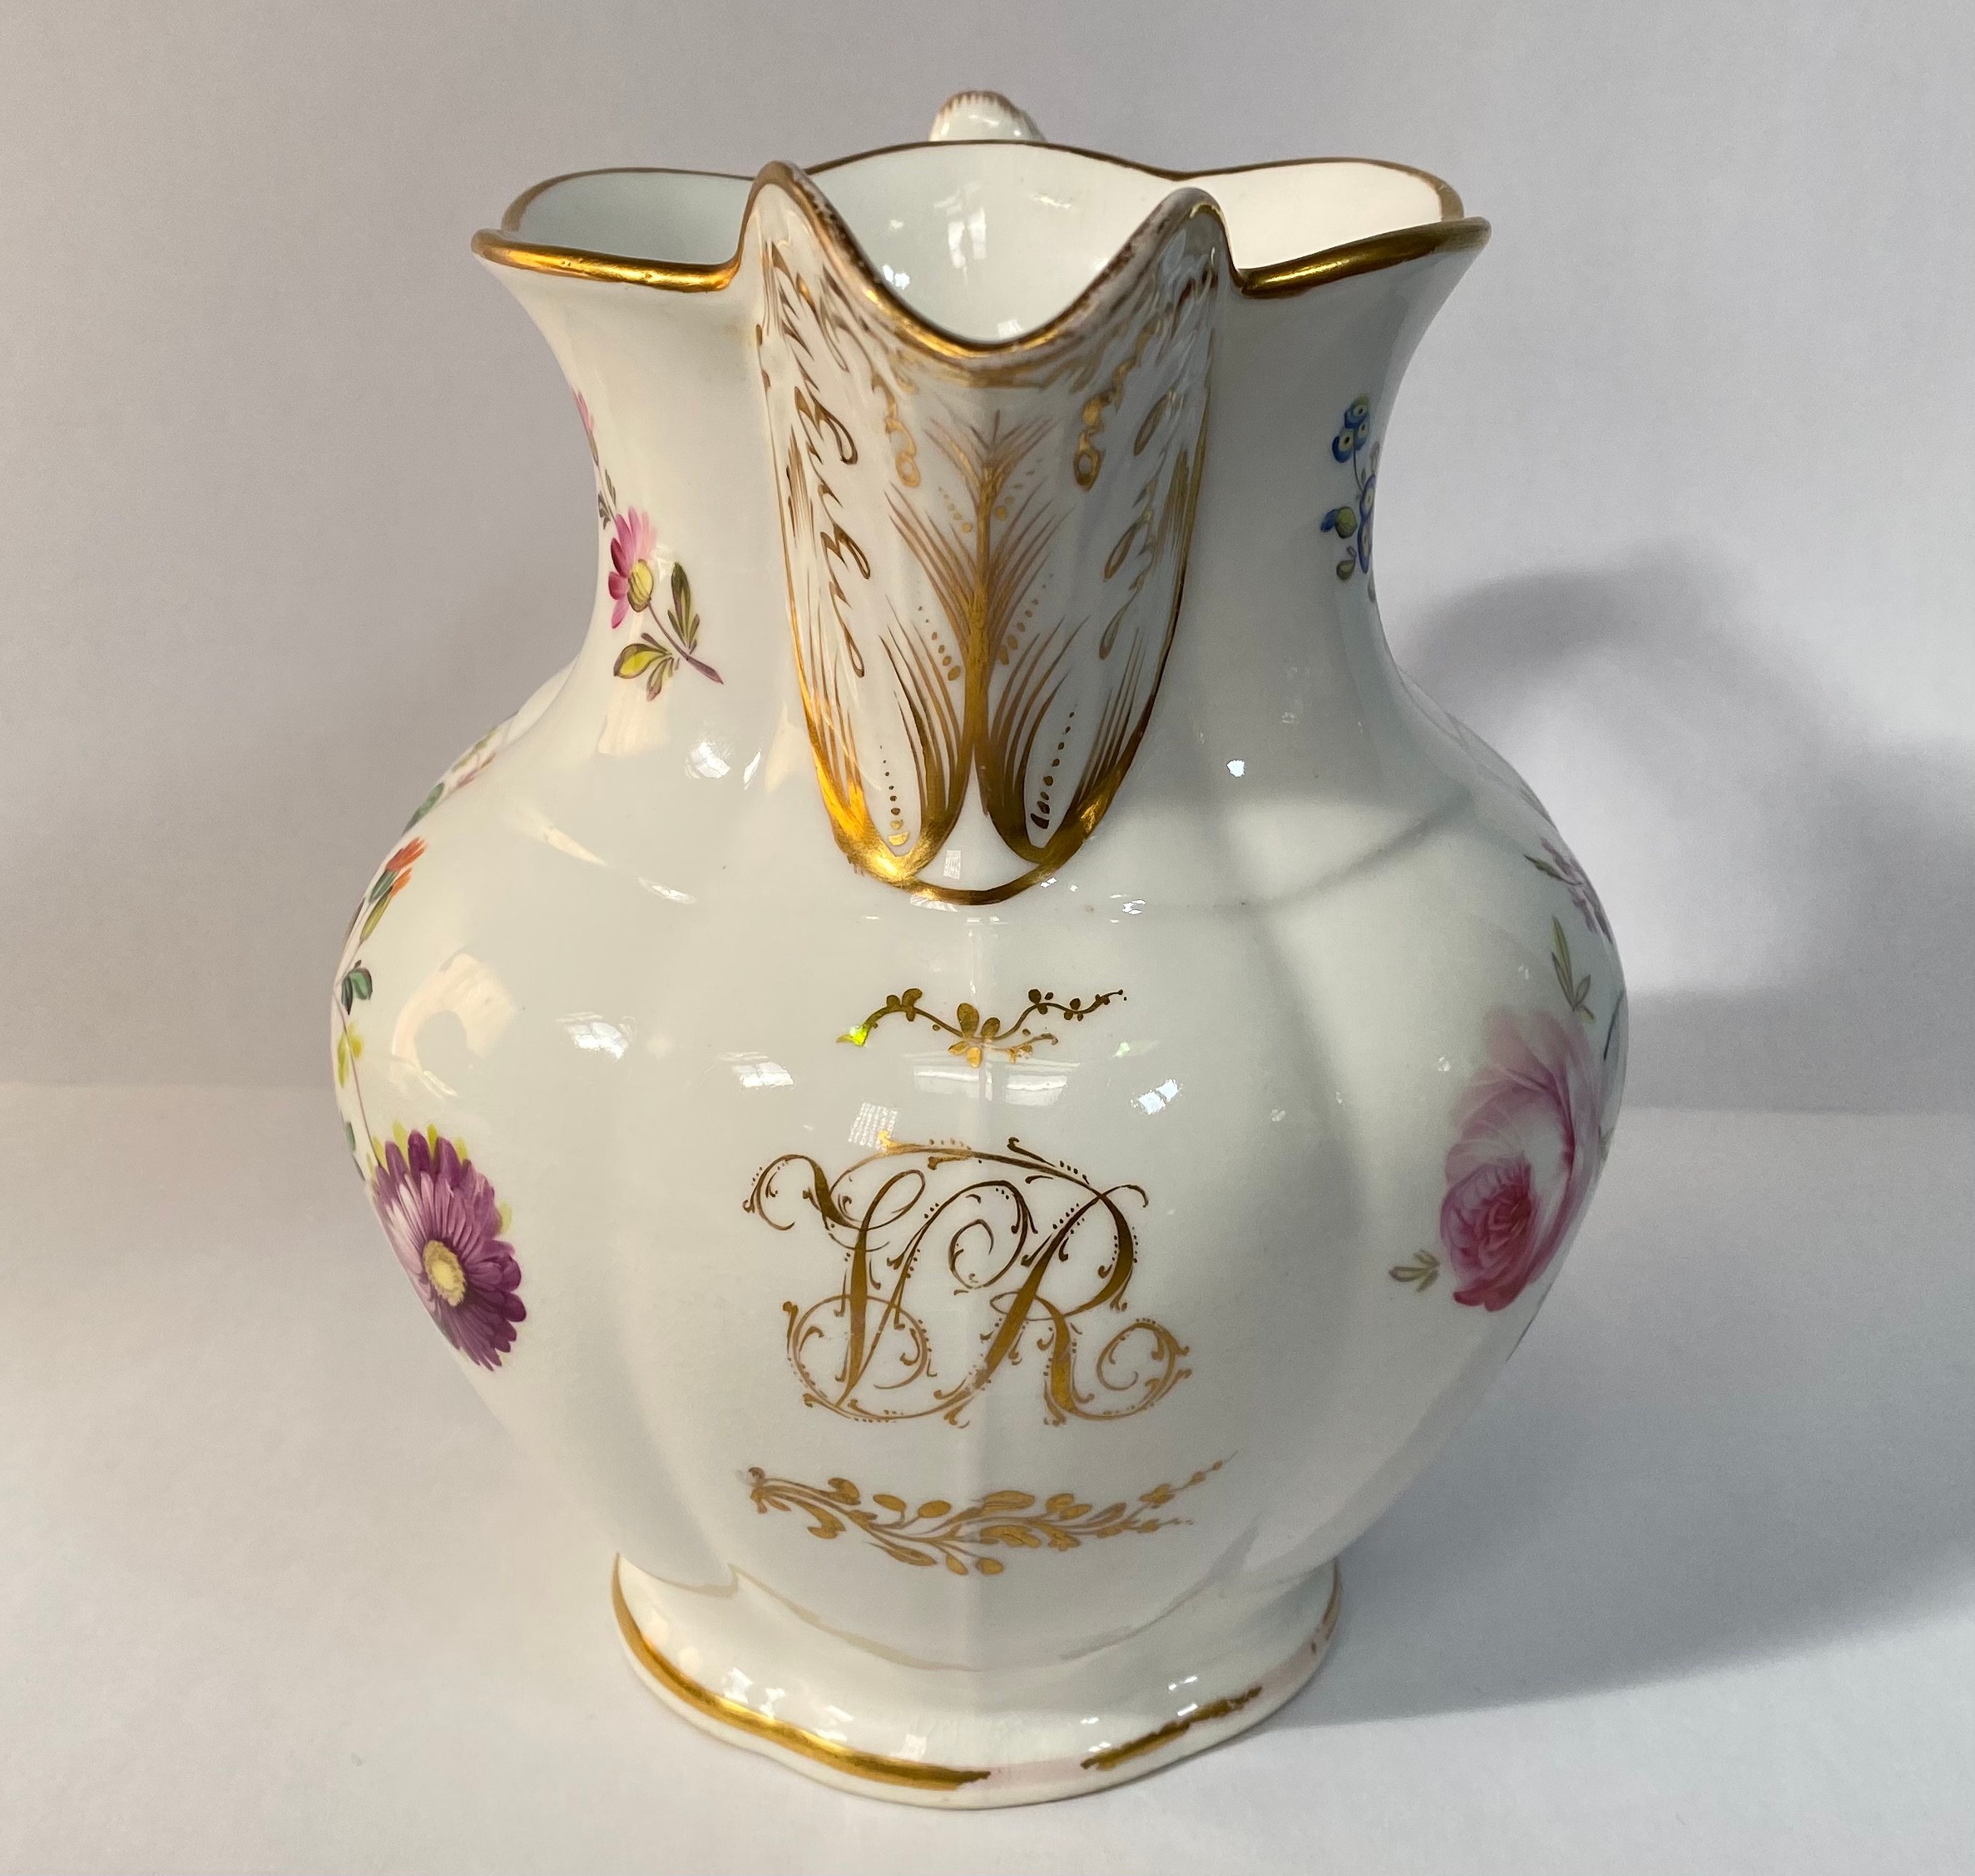 A 19th century porcelain jug, painted with flowers and with a gilt monogram 'VR', 19cm high, - Image 3 of 6